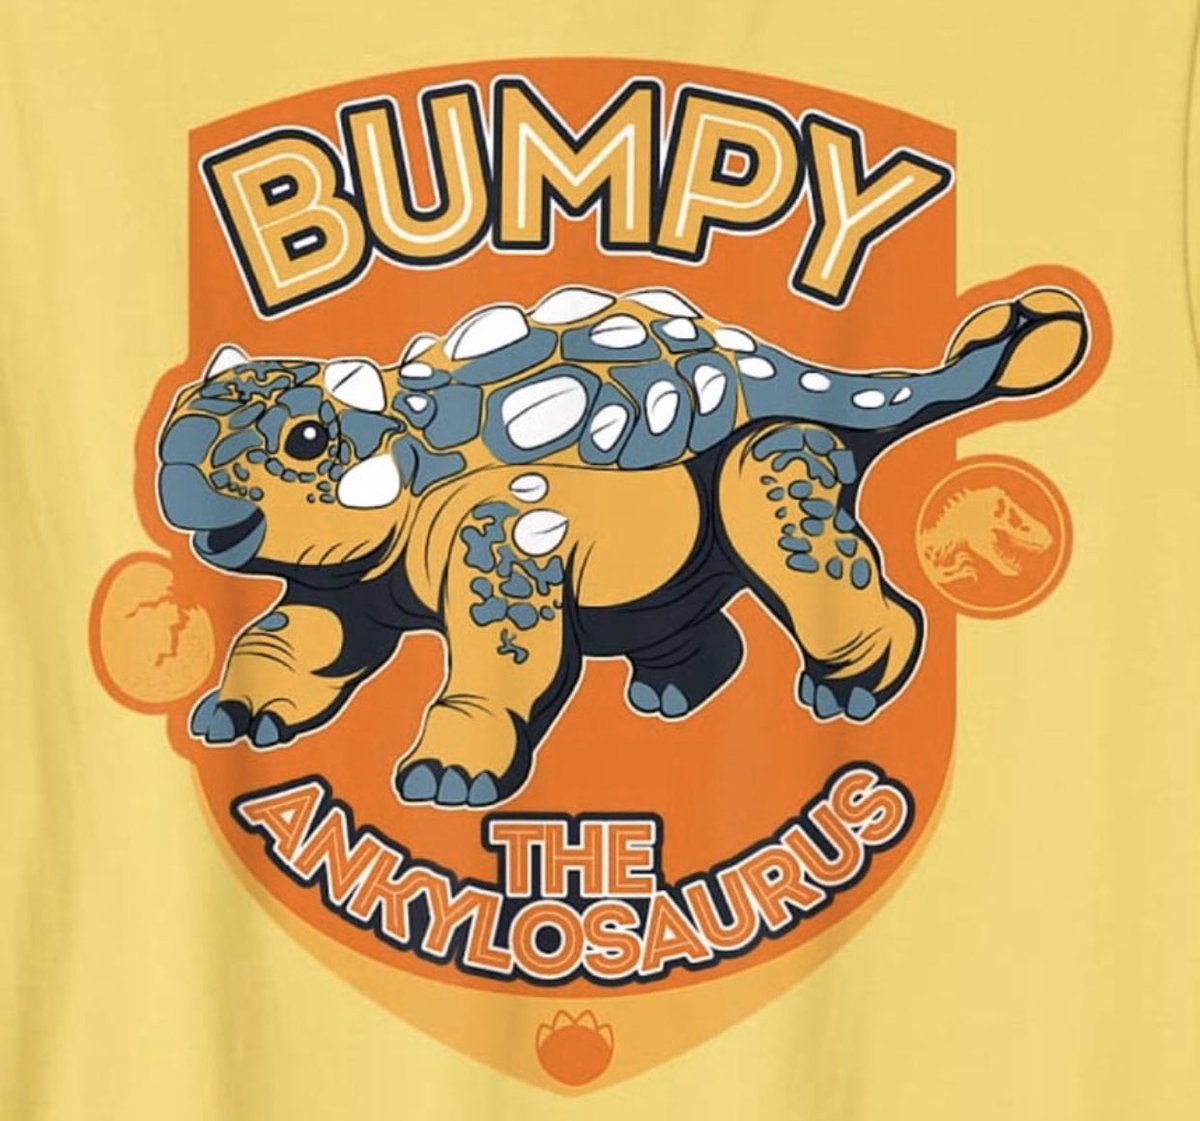 It’s important for you to know that the Jurassic World Netflix series will feature a baby Ankylosaurus named Bumpy.BUMPY.